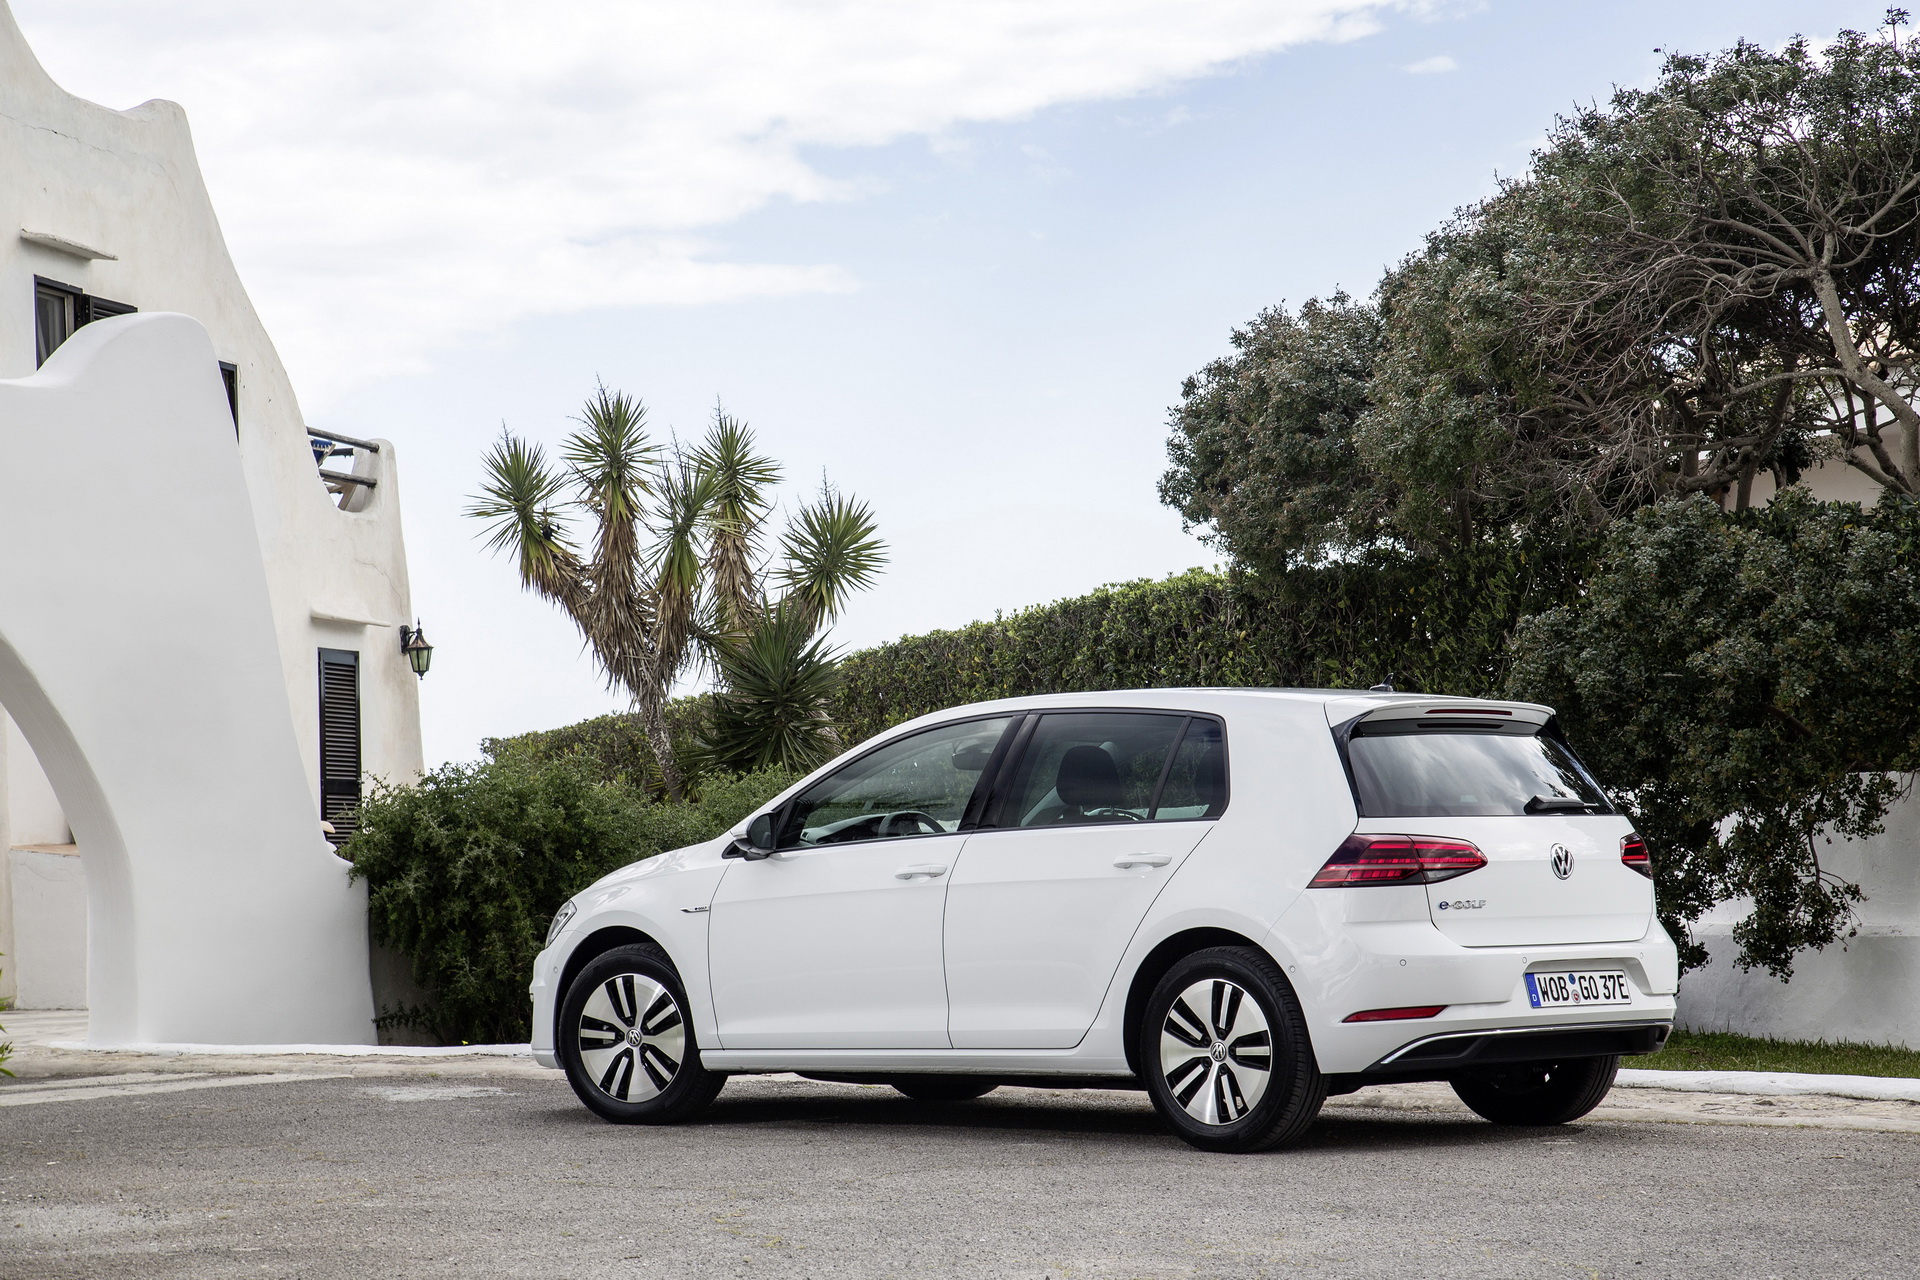 Car Pictures Review: Vw E Golf 2020